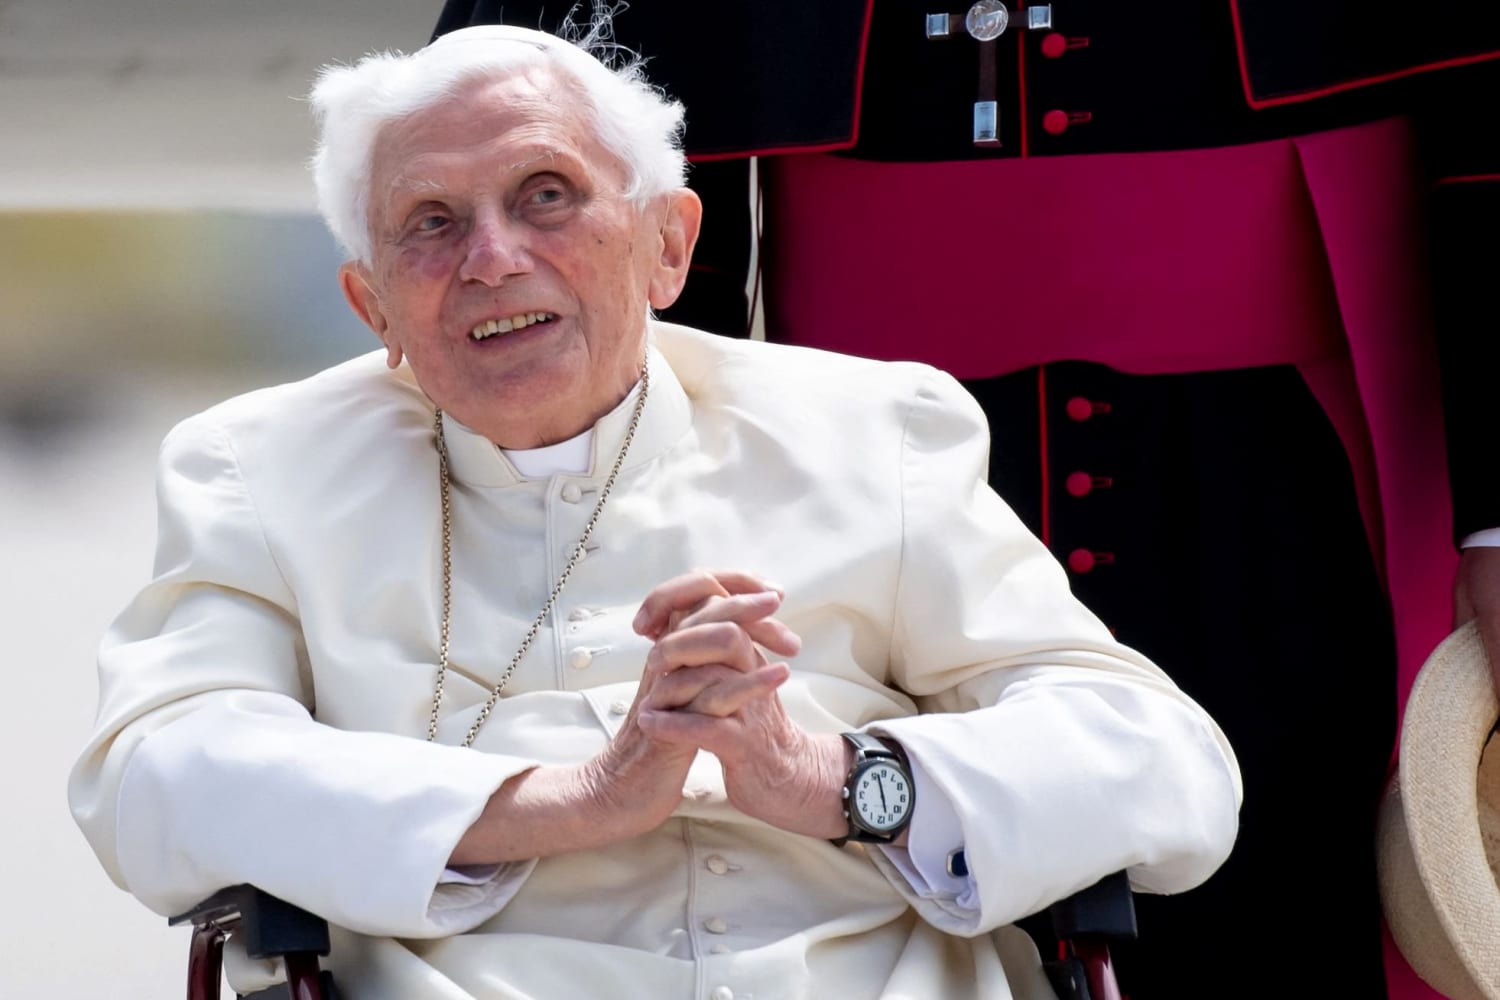 Pope Benedict failed to act against abusive priests in Germany, report finds